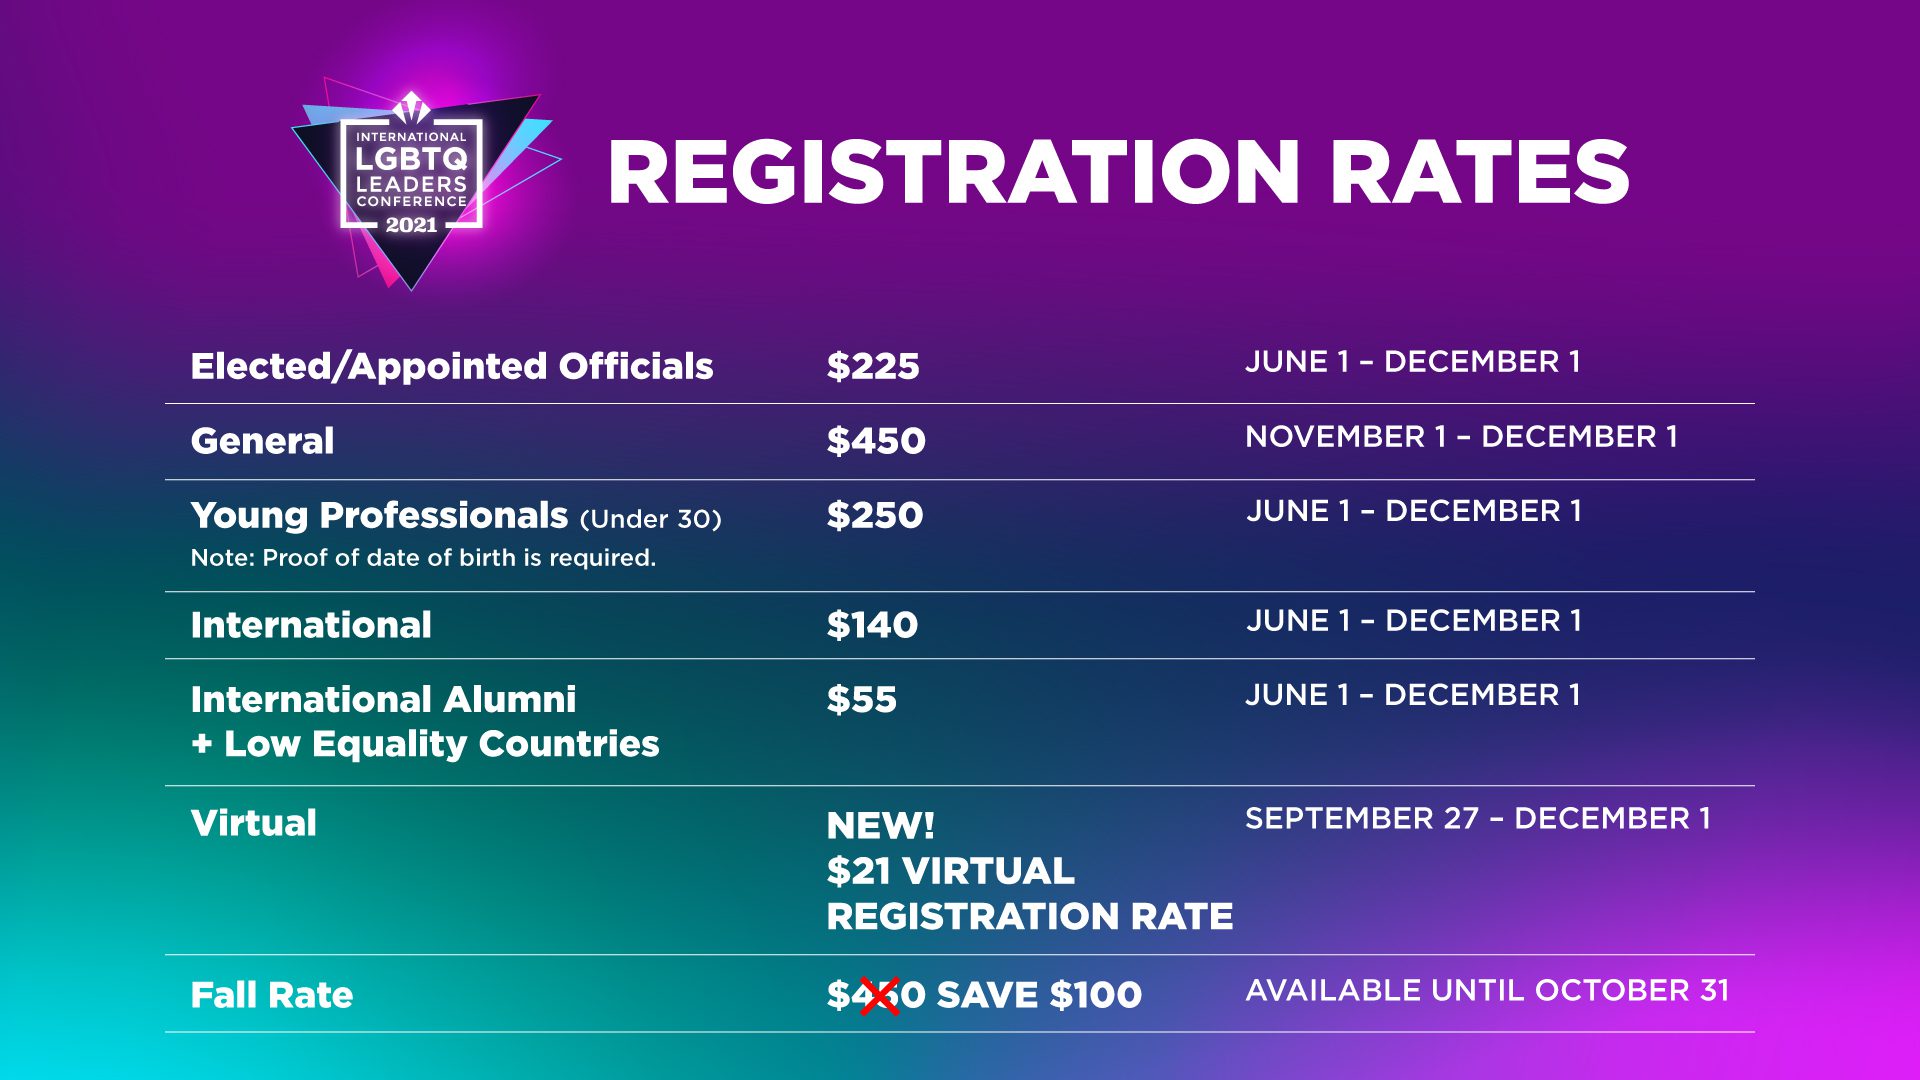 REGISTRATION RATES Elected/Appointed Officials $225 June 1 – December 1 Young Professionals (Under 30) $250 June 1 – December 1 Note: Proof of date of birth is required. International $140 June 1 – December 1 International Alumni + Low Equality Countries $55 June 1 – December 1 Virtual TBA September 20 – December 1 Fall Rate $350 September 7 – October 10 General $450 October 11 – December 1